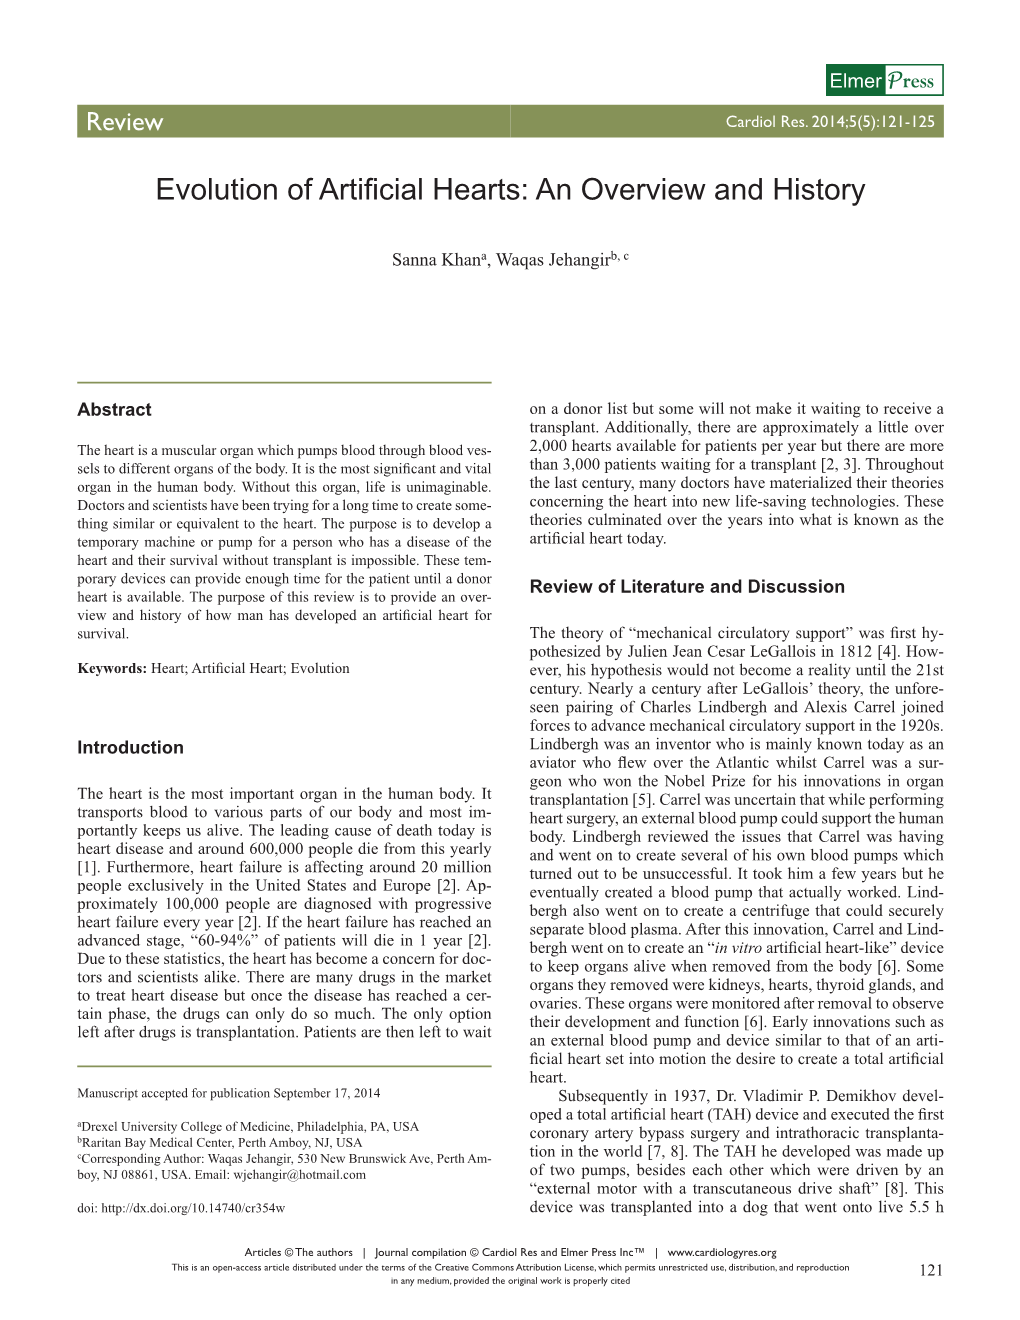 Evolution of Artificial Hearts: an Overview and History